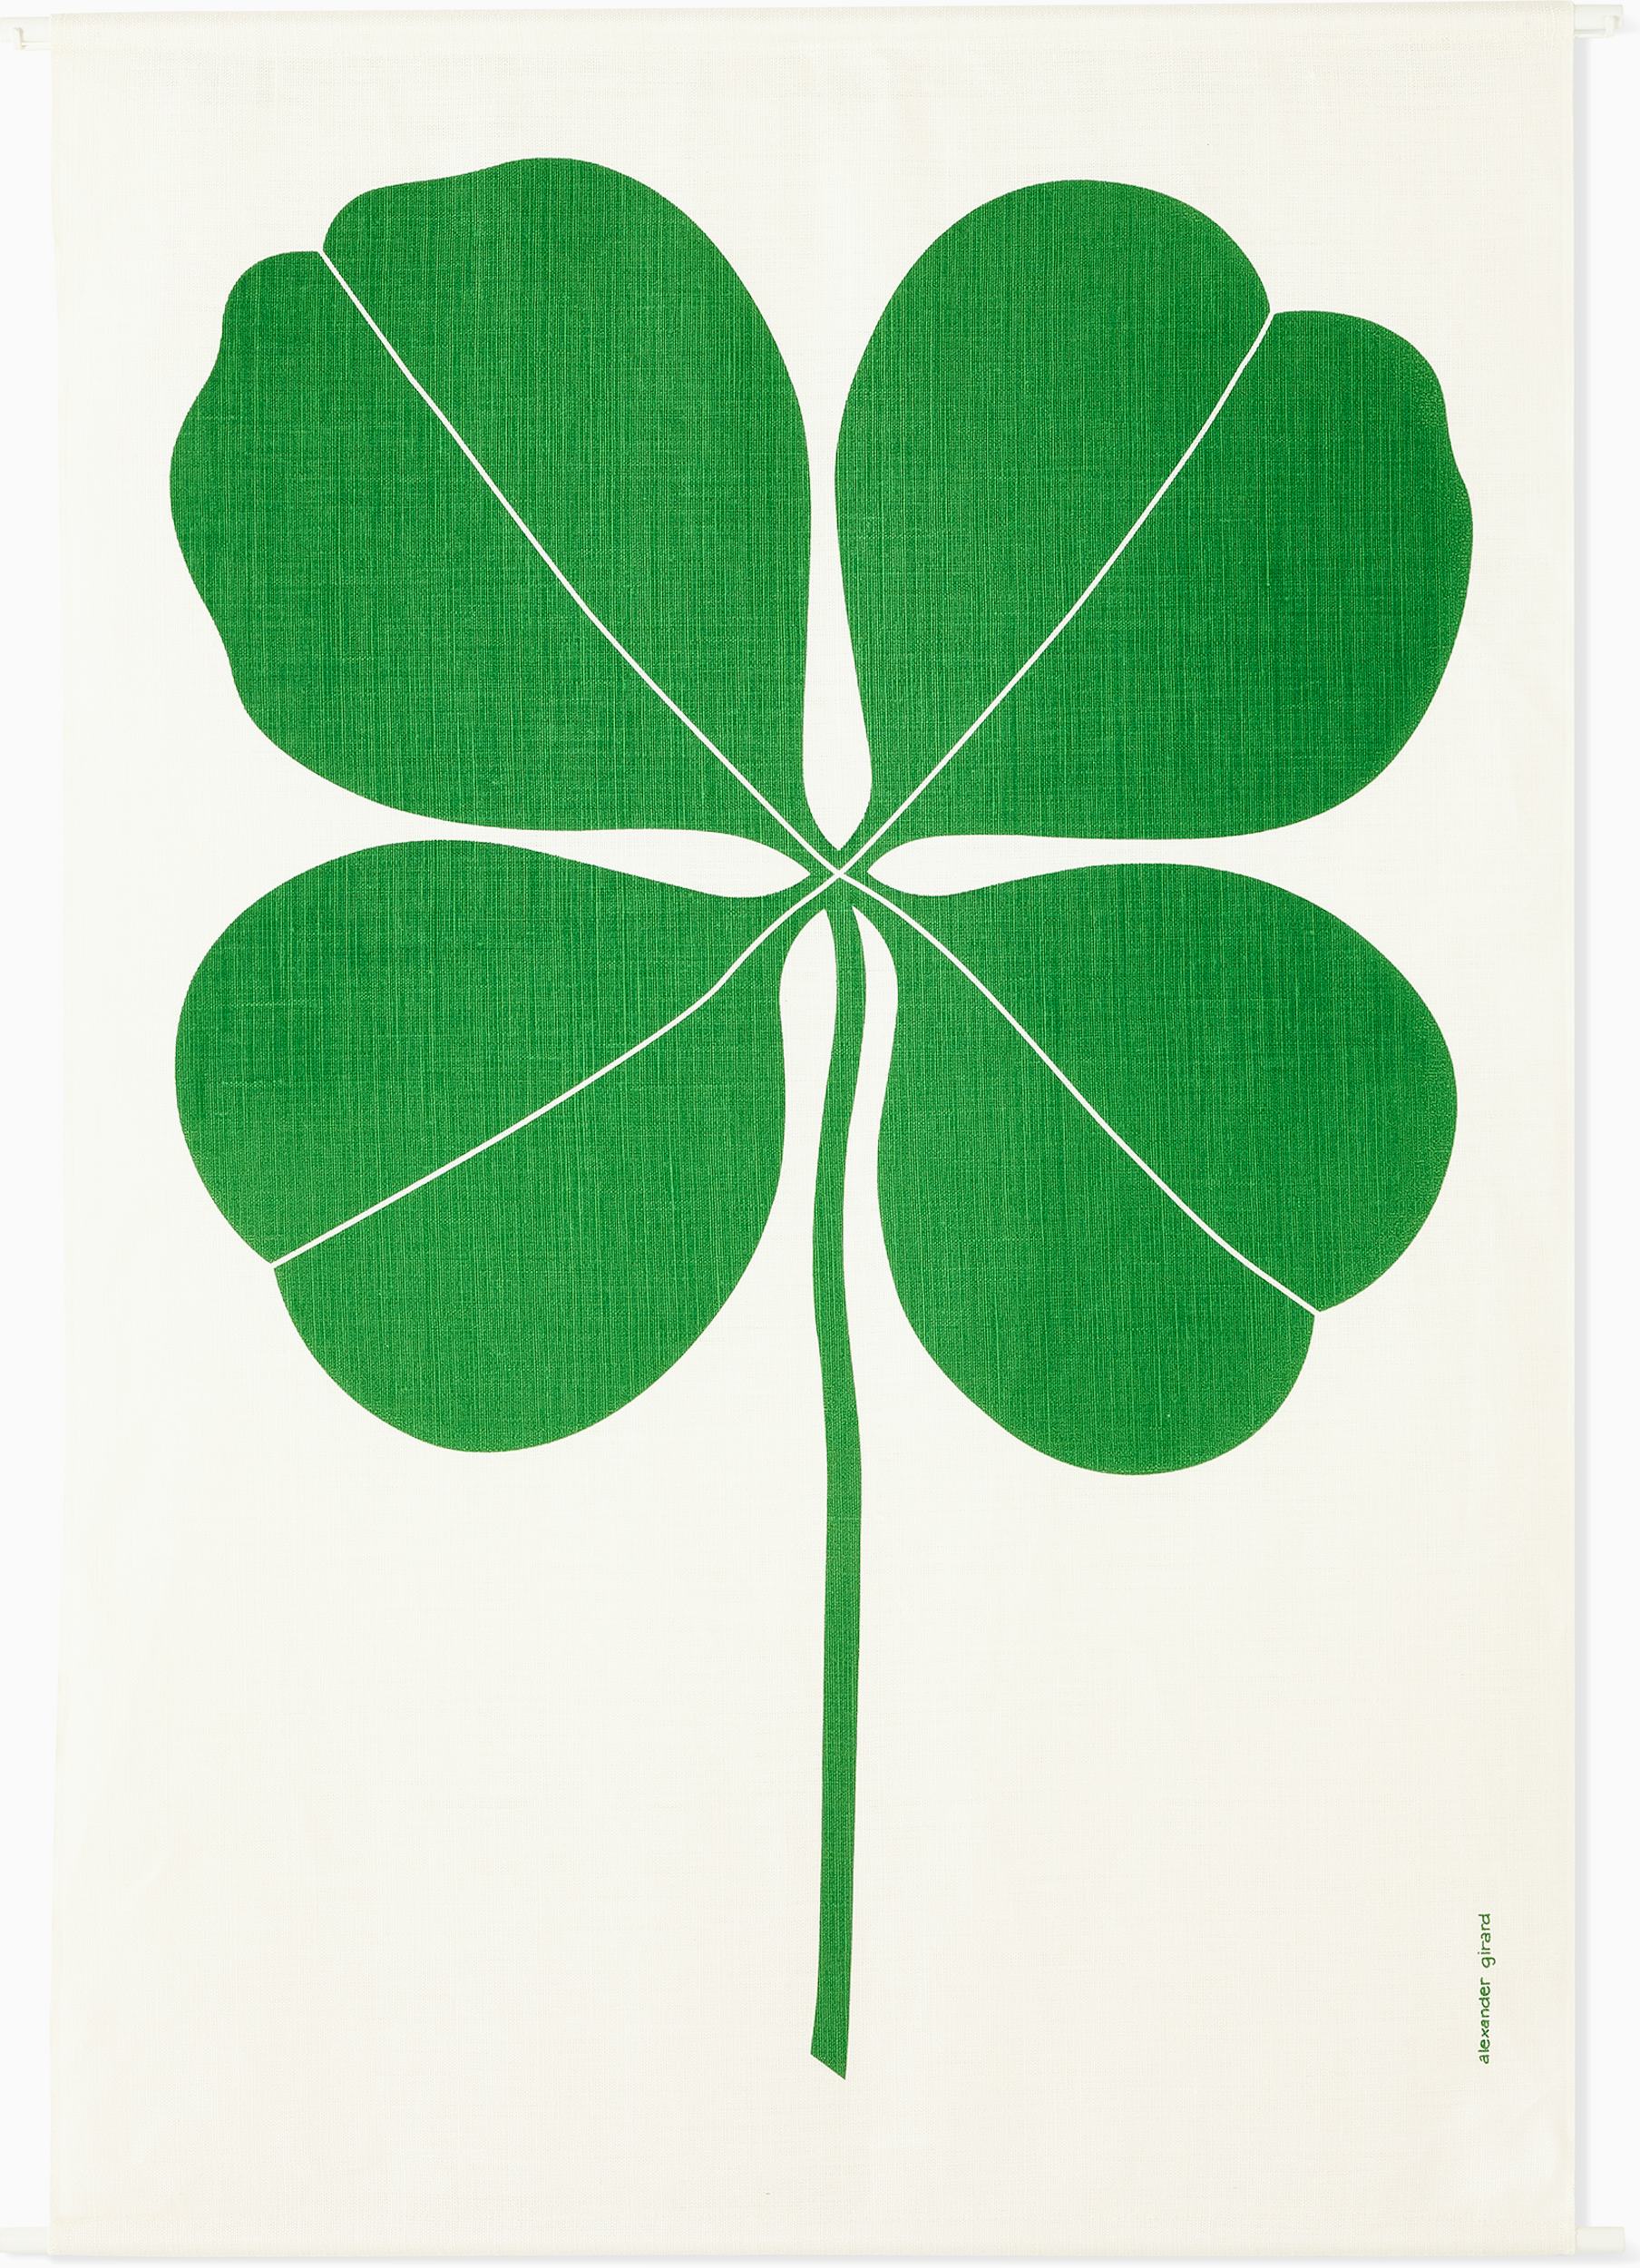 How to Take Care of Four-Leaf Clovers